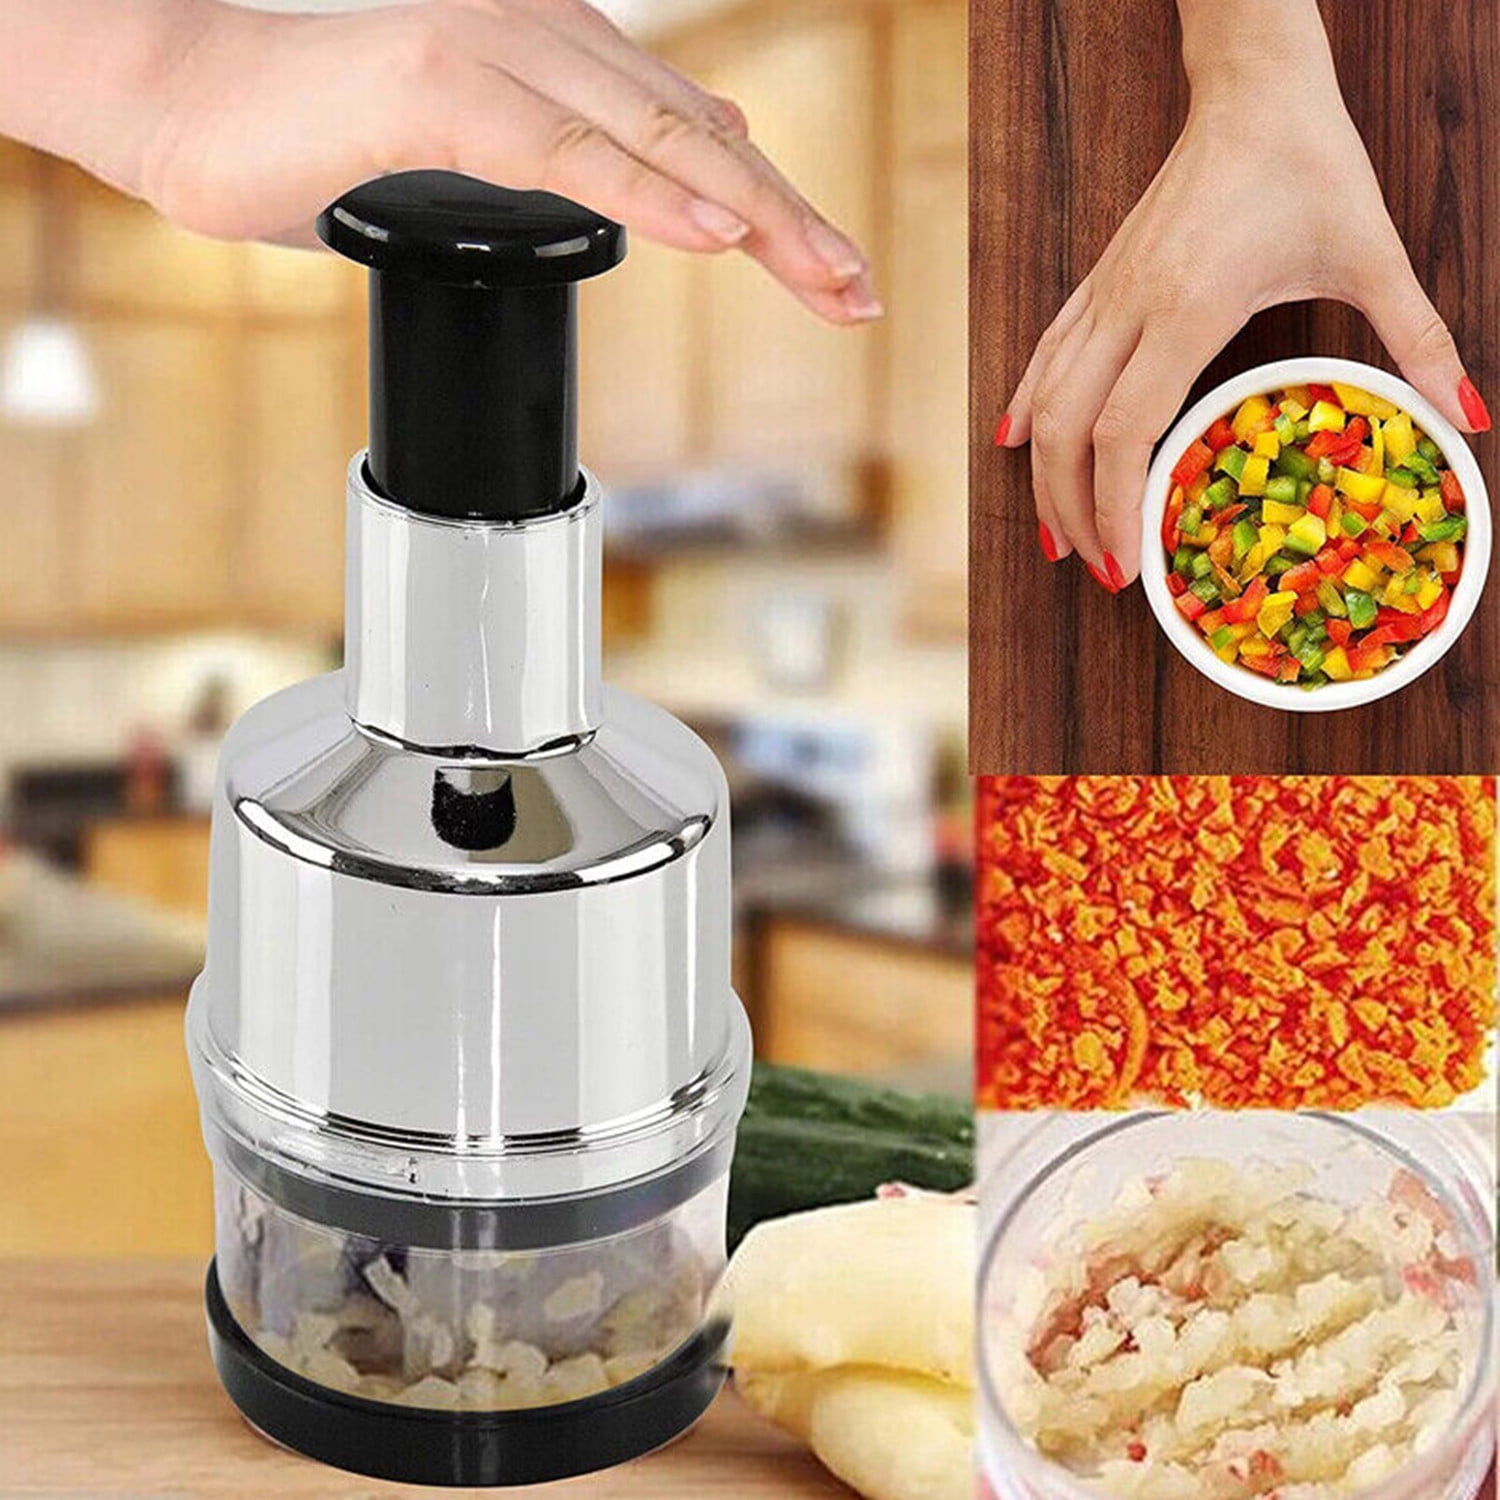 Manual Garlic Chopper, Min Stainless Steel Manual Onion Chopper, High  Efficiency And Easy To Clean, Vegetable Cutter For Onion Nuts Cilantro,  With 2 P